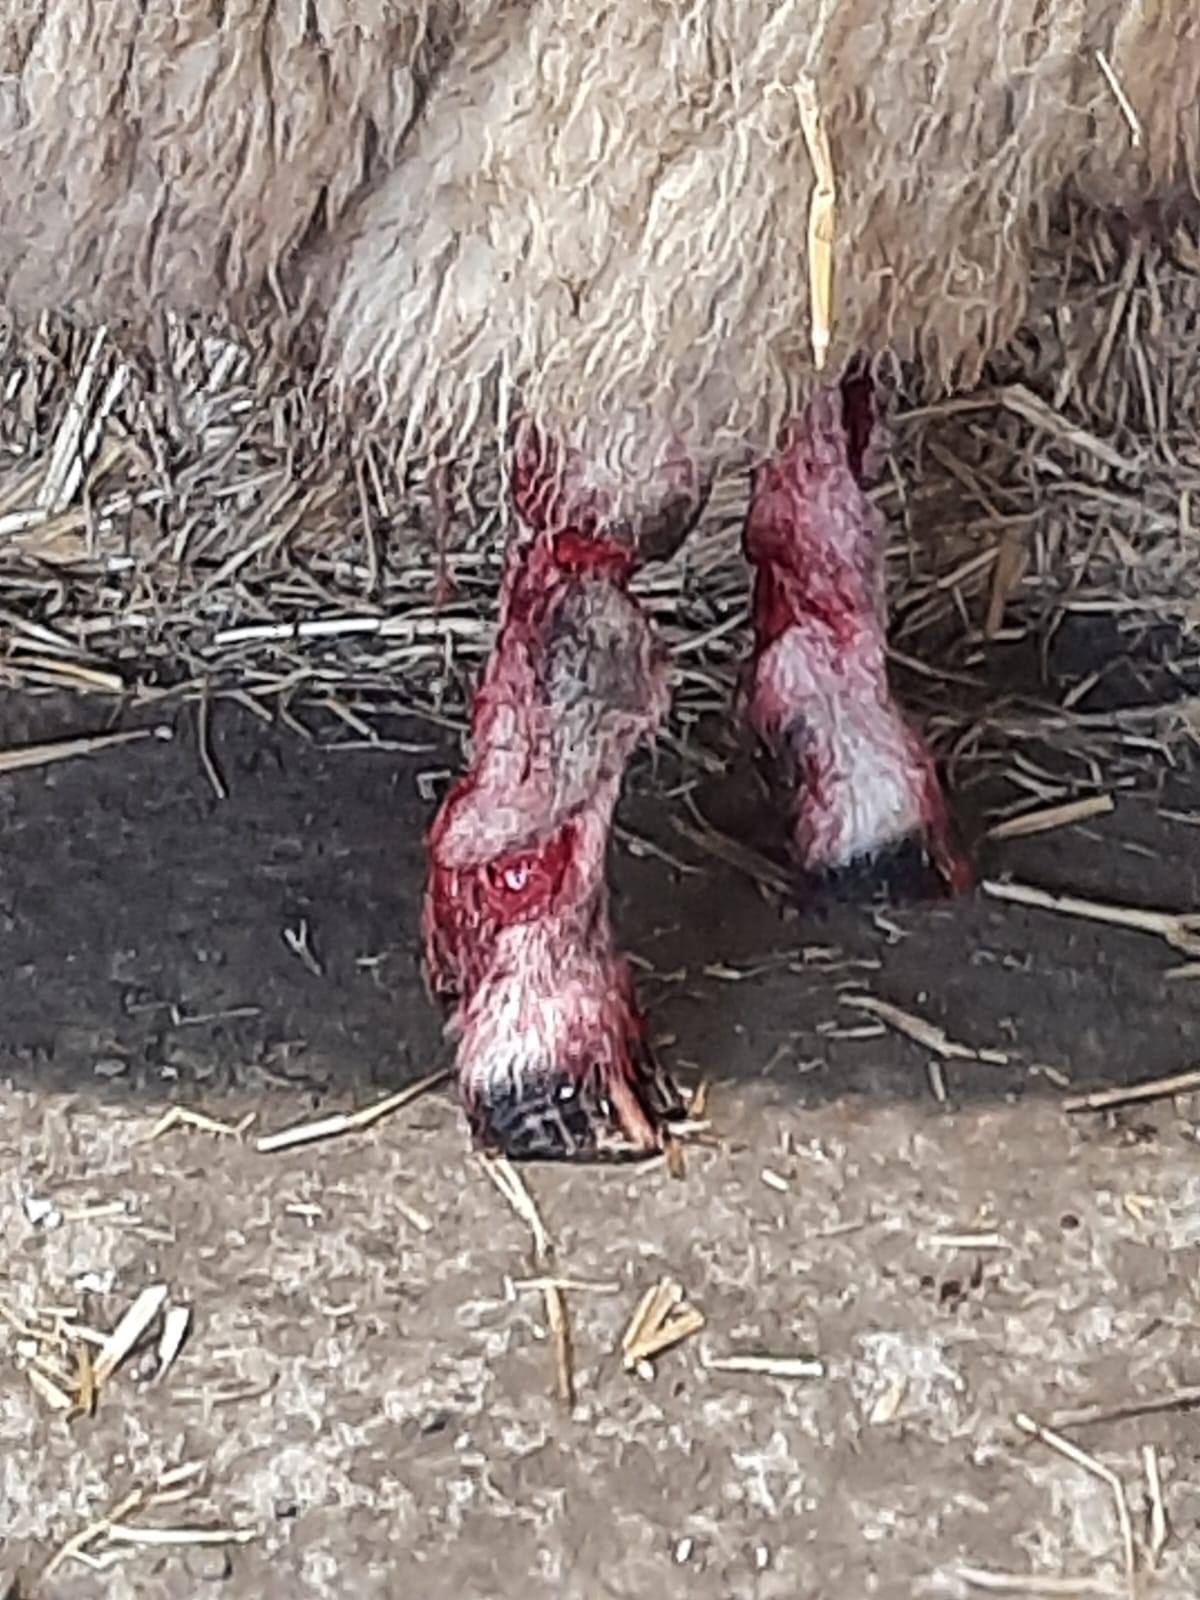 Pictures show 'horrific' injuries after ewe attacked by dog